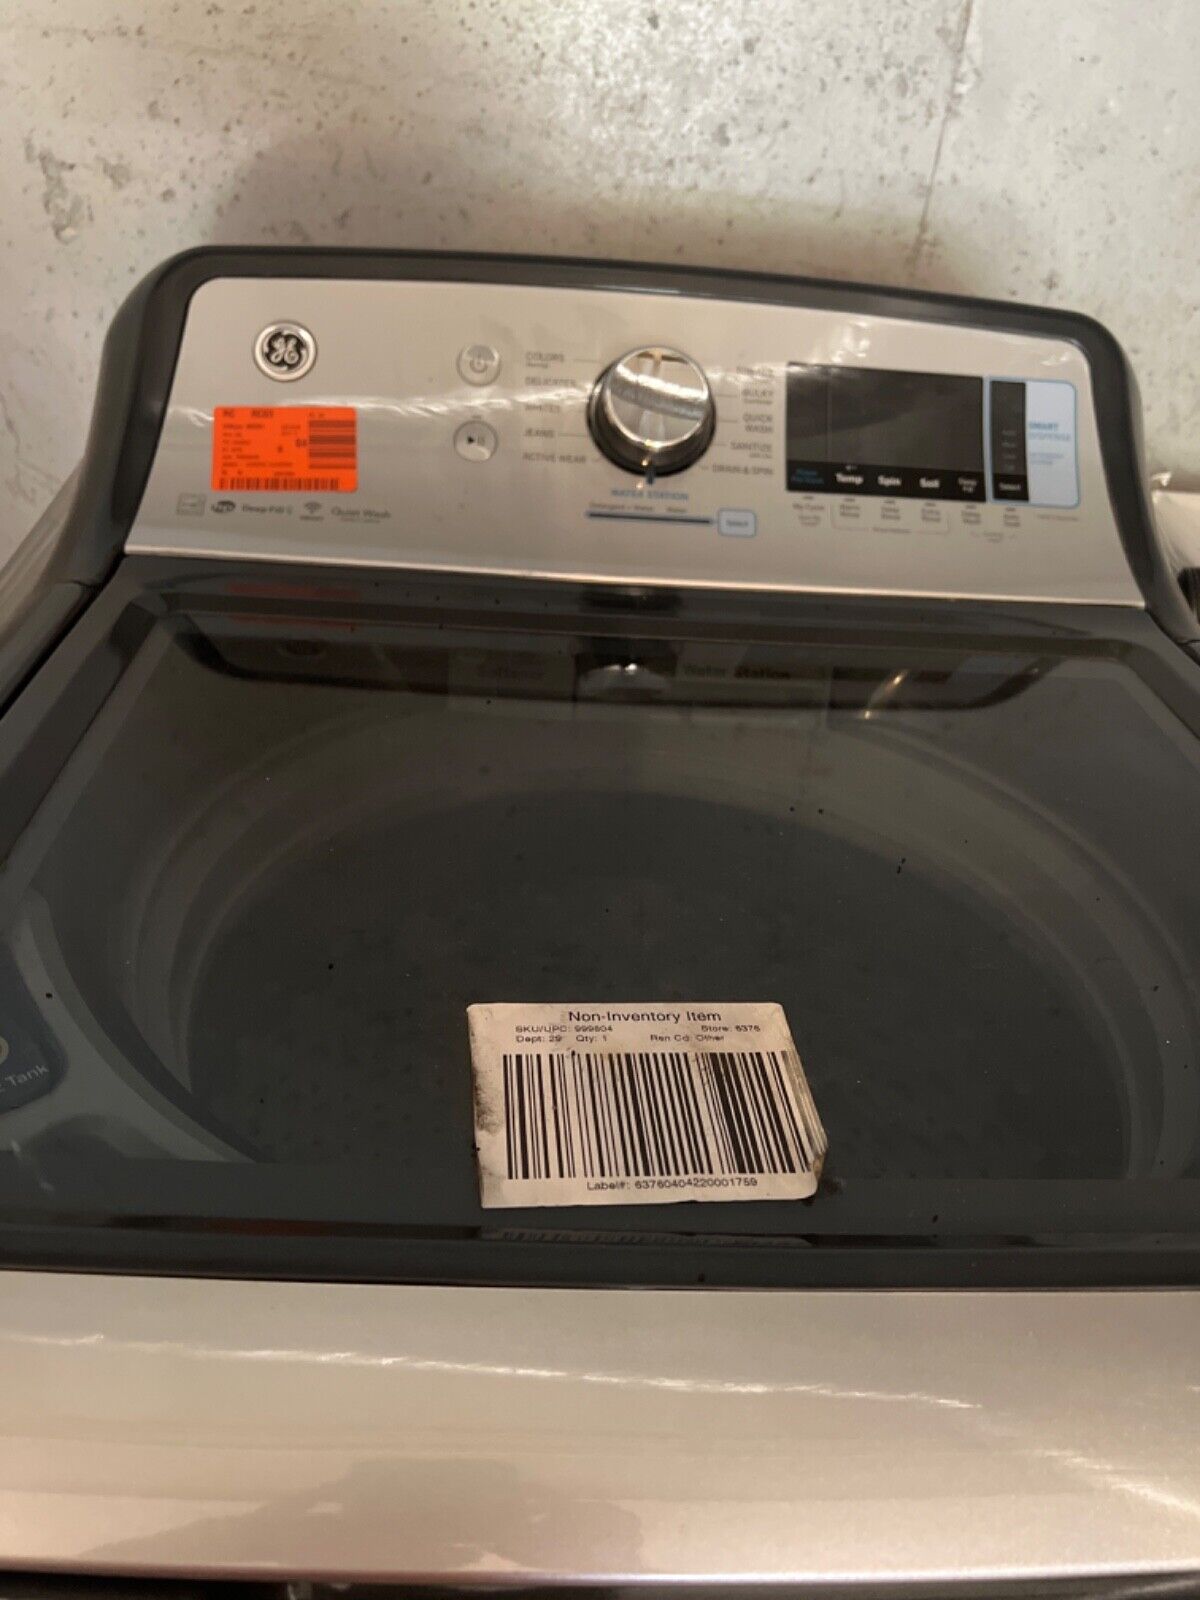 New smart GE washer out of box